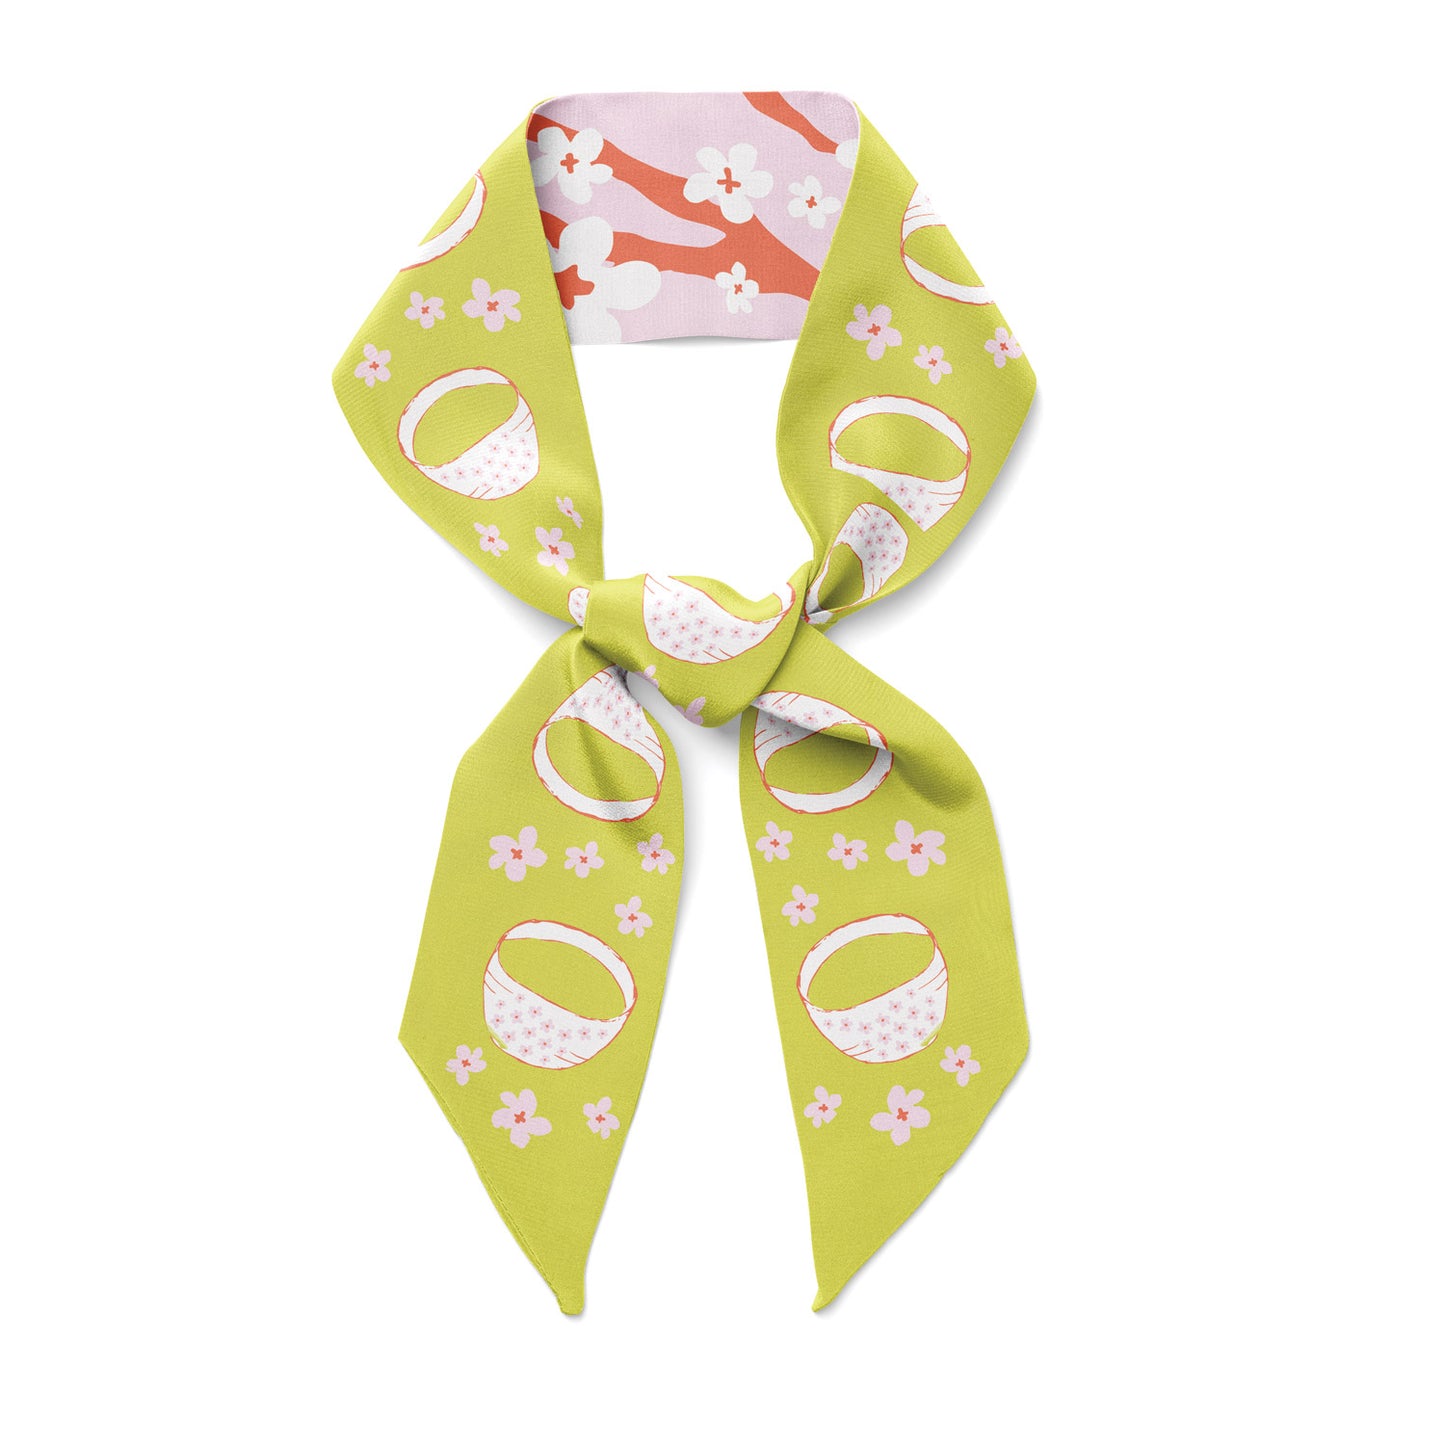 Cherry blossoms and green tea Sakura Matcha twilly skinny scarf double sided accessory